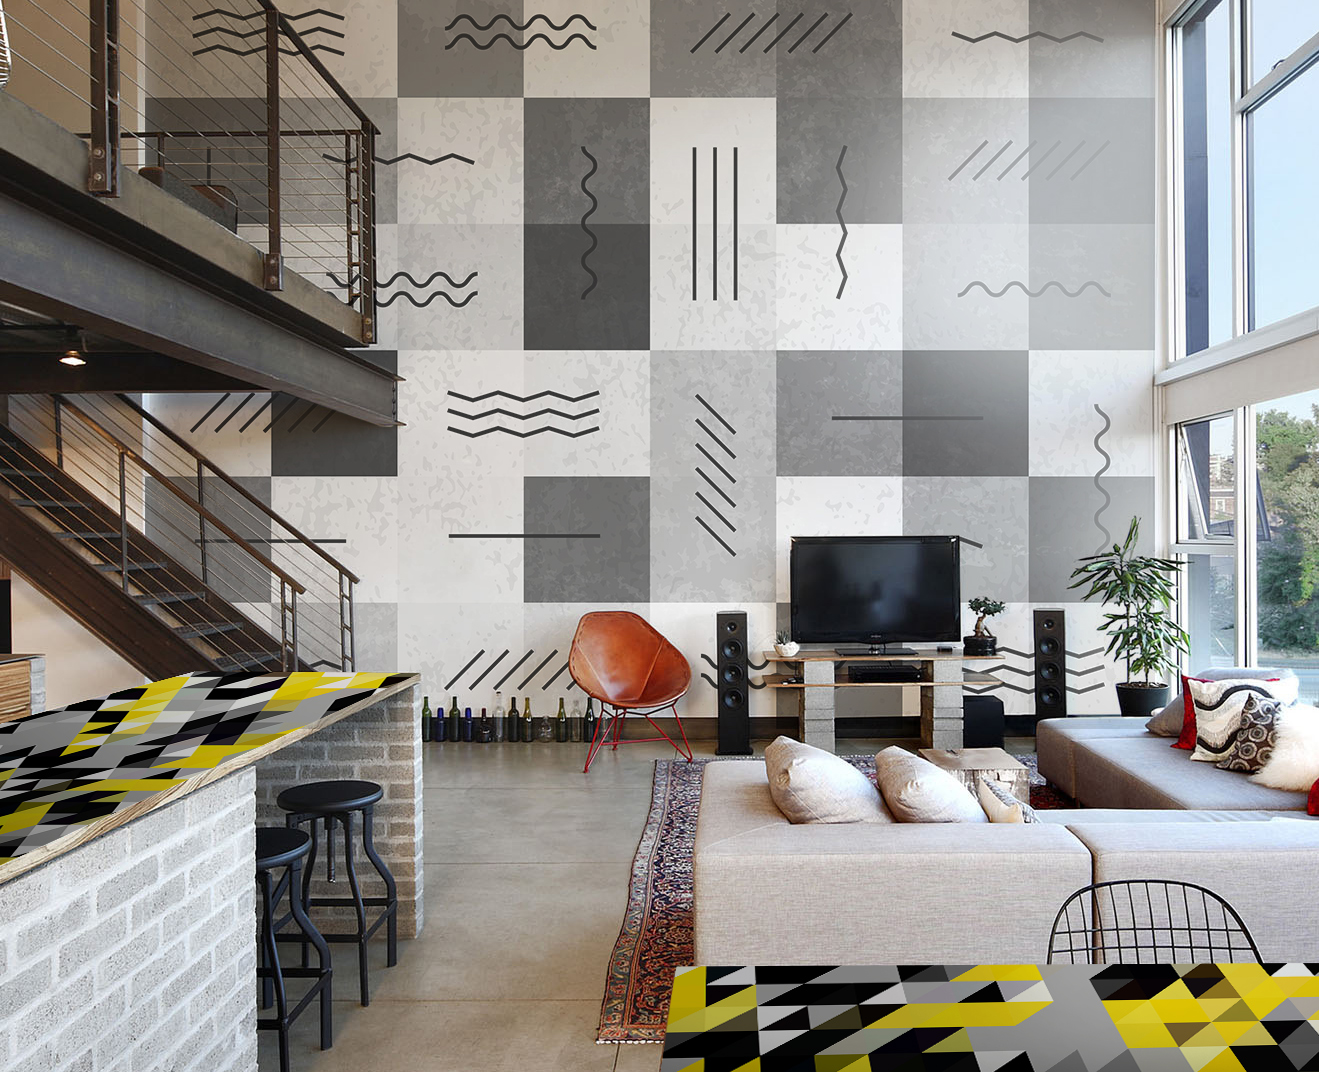 Industrial living room • Contemporary - Living room - Wall Murals - Stickers - Textures and patterns - Black and white